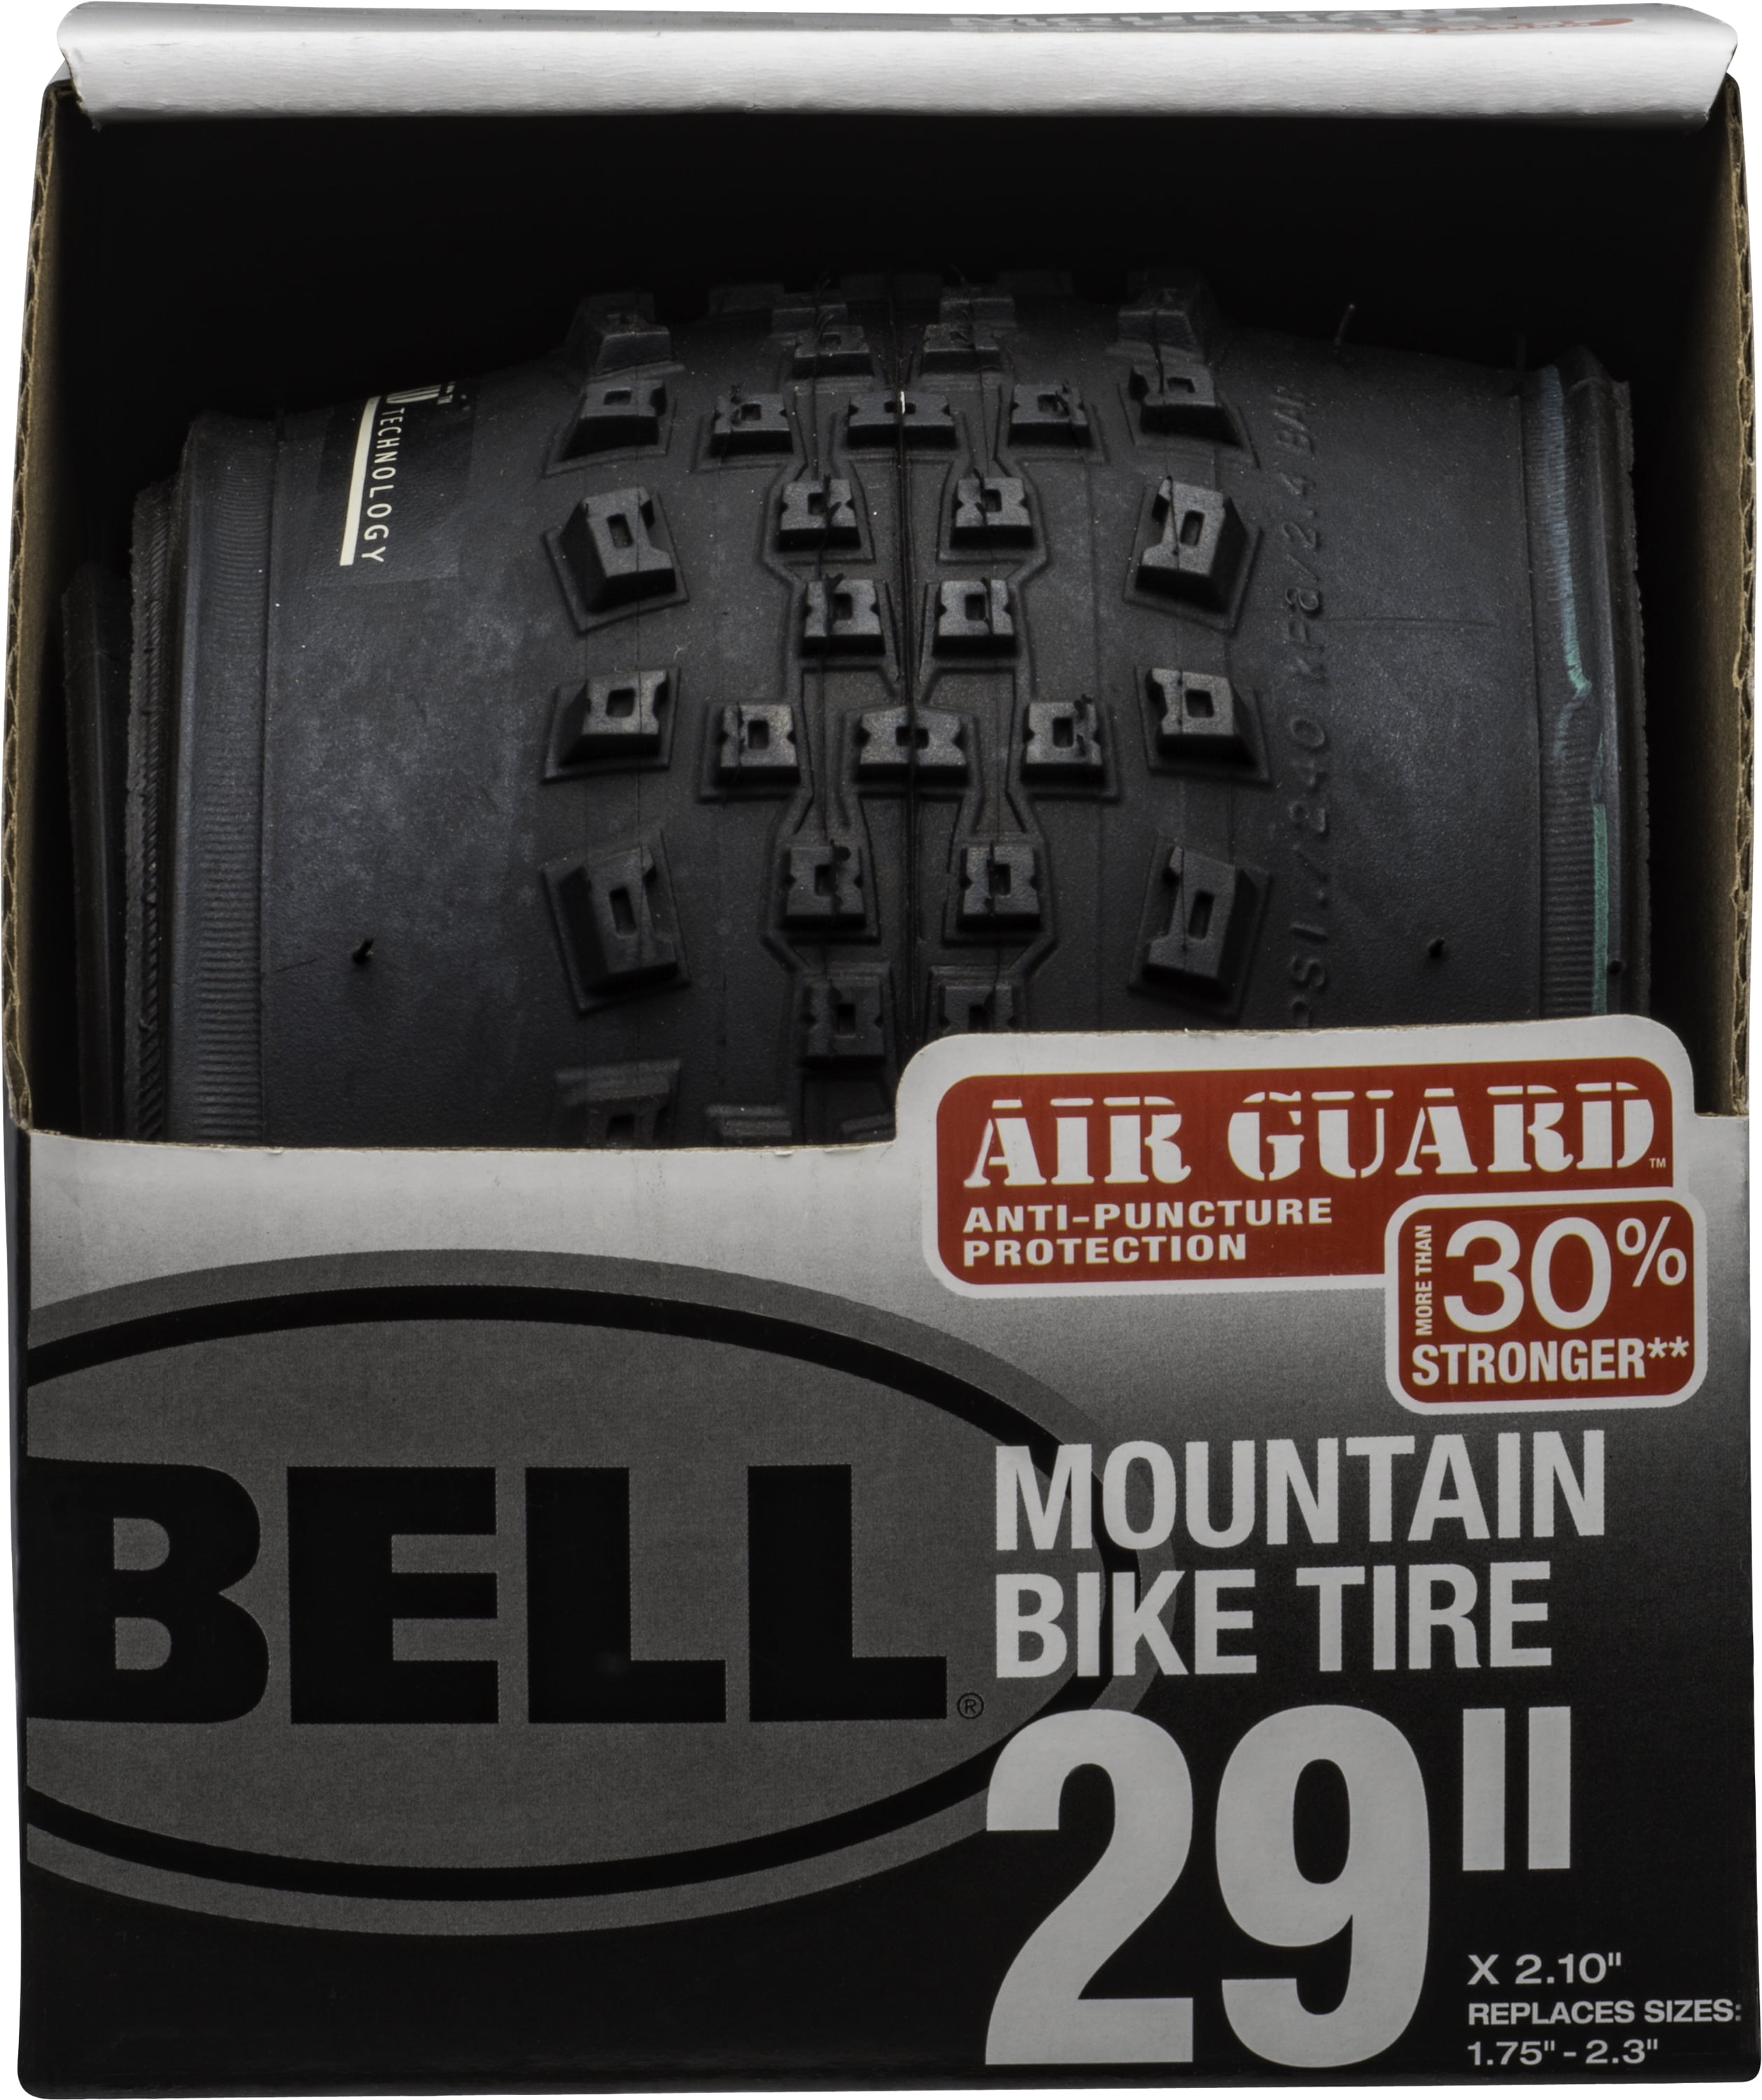 Bell Mountain Bike Tire 20” X 2.10 Air Guard Anti-puncture 30 Stronger for sale online